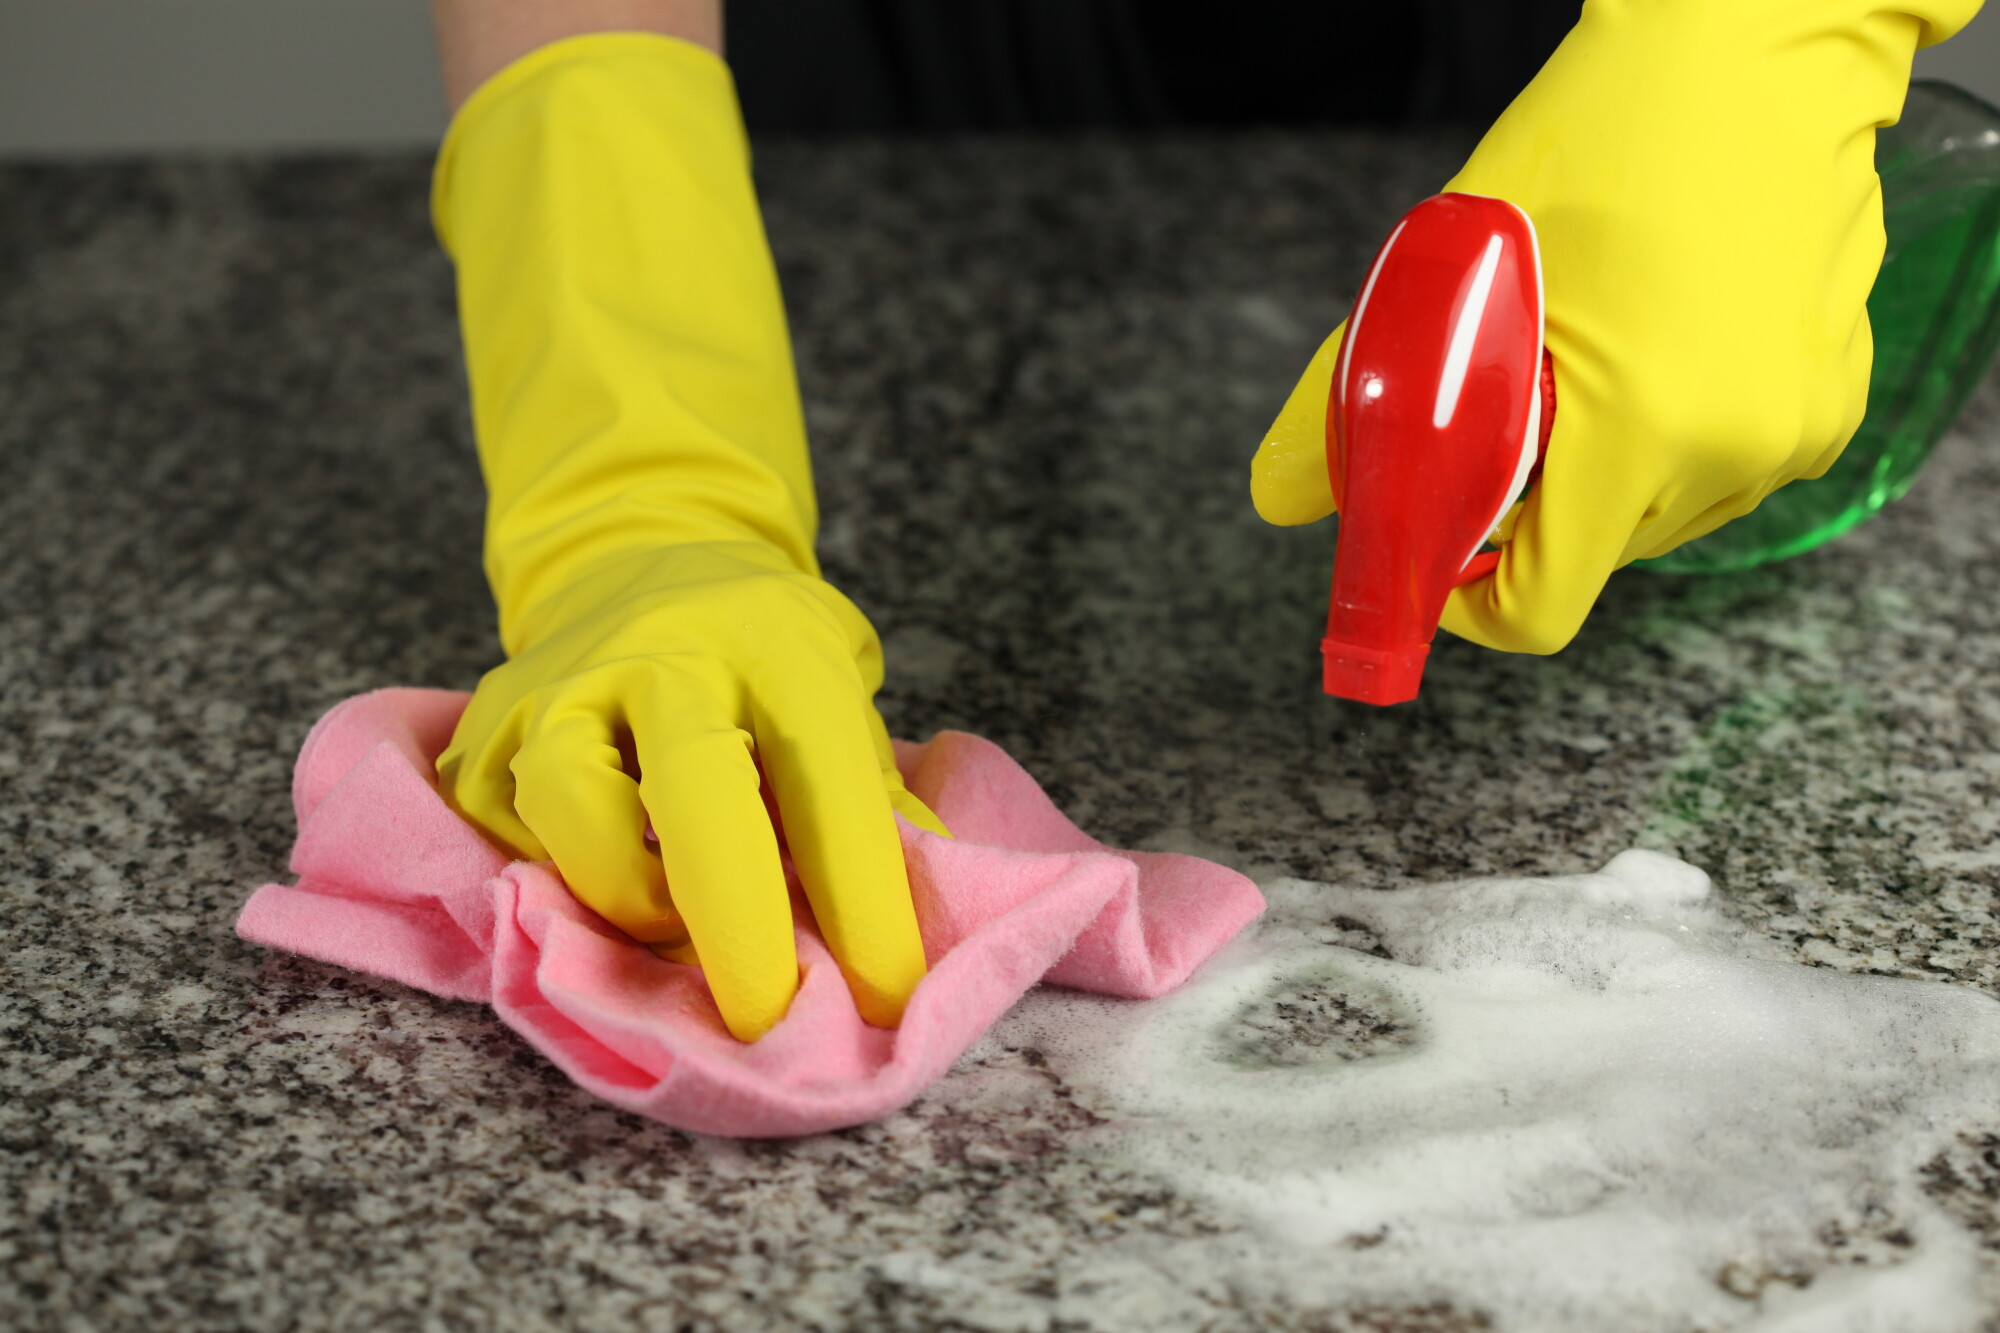 5 Simple House Cleaning Tips to Keep Your Home Looking Its Best